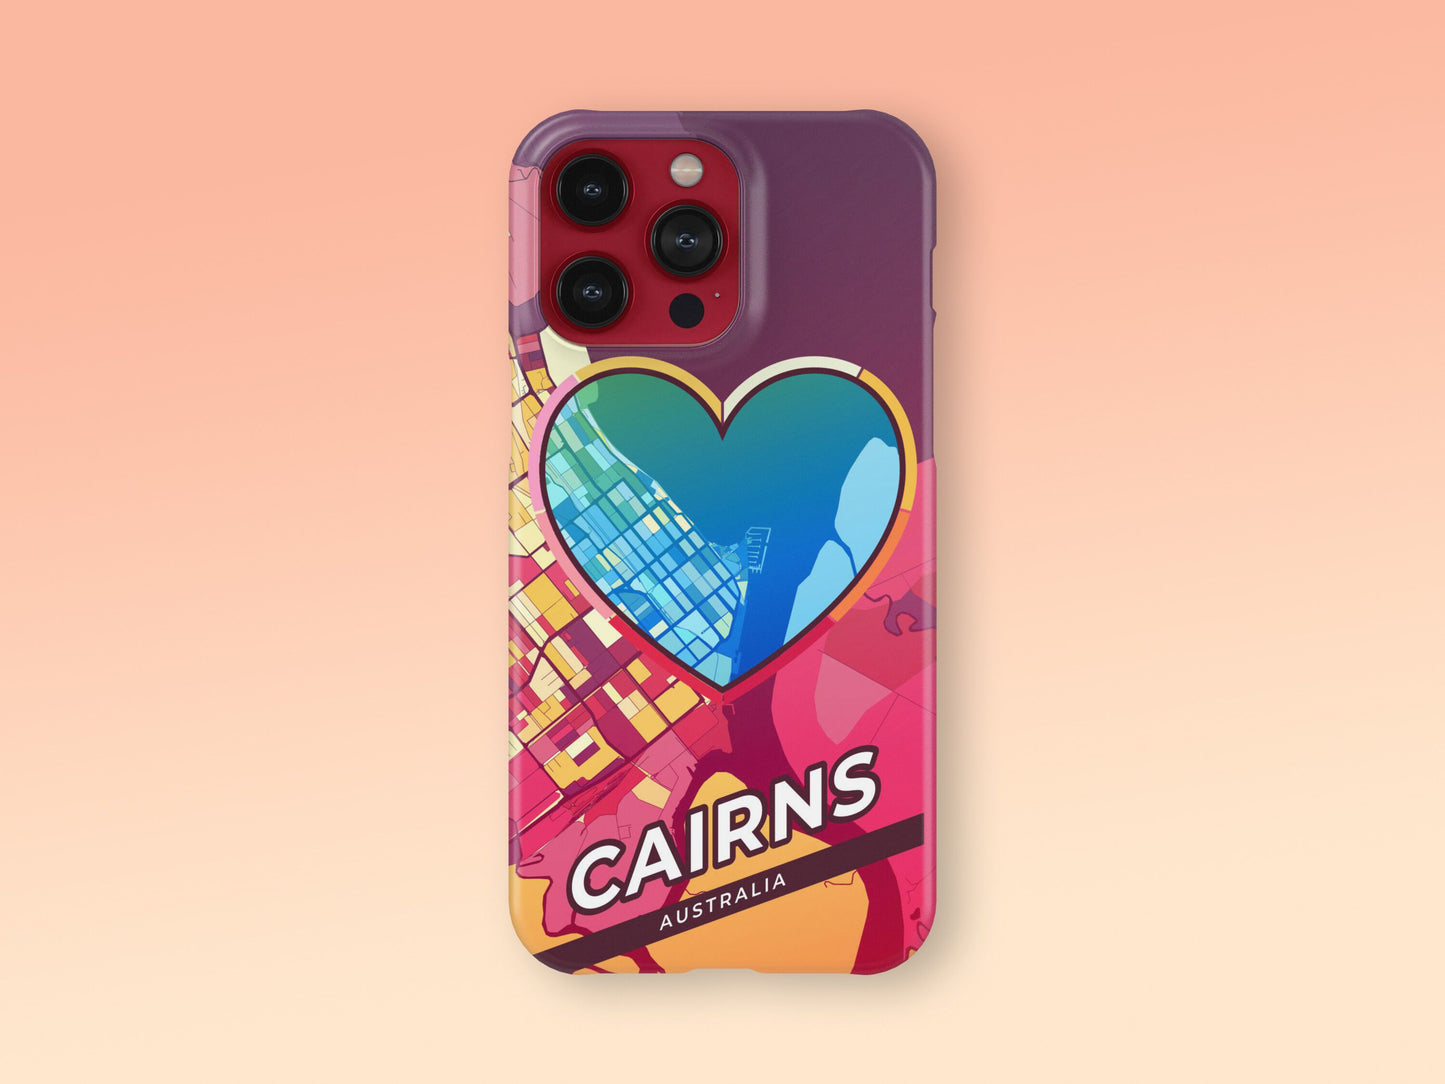 Cairns Australia slim phone case with colorful icon. Birthday, wedding or housewarming gift. Couple match cases. 2